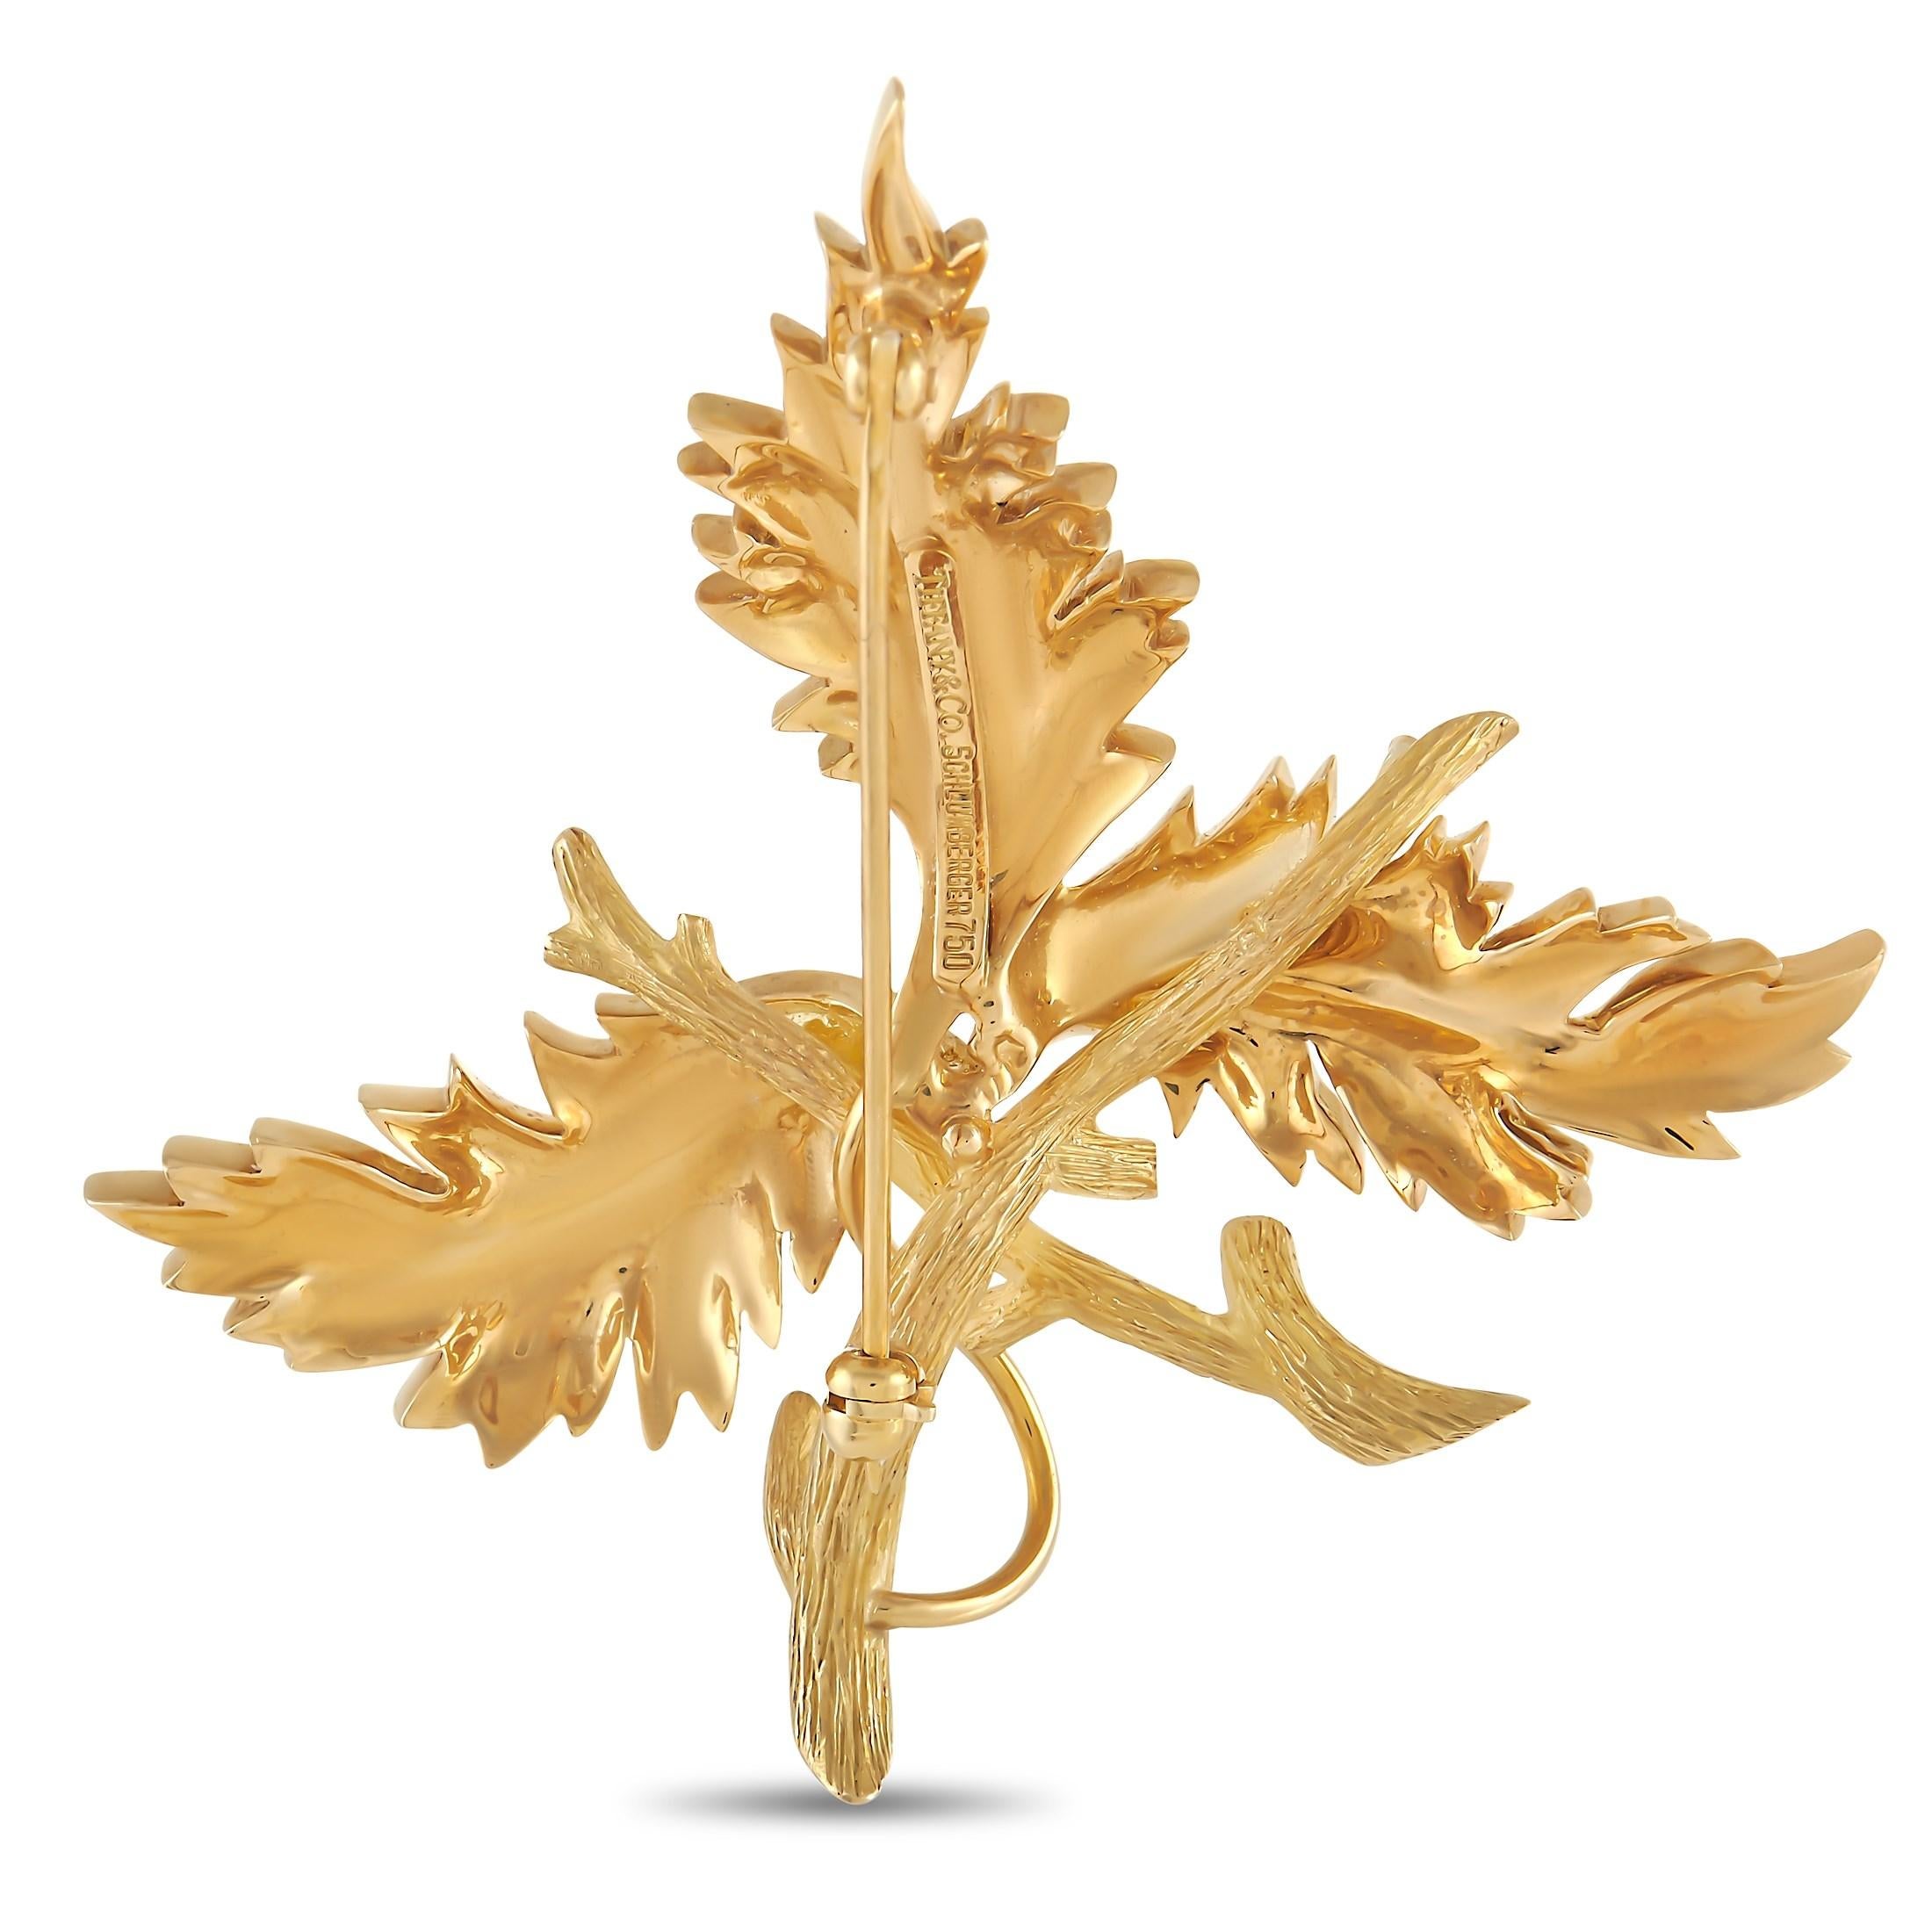 This gorgeous brooch from the Tiffany & Co. Schlumberger collection draws inspiration from the beauty of nature. Made from 18K Yellow Gold, this exciting style measures 2” round.

This jewelry piece is offered in estate condition and includes a gift